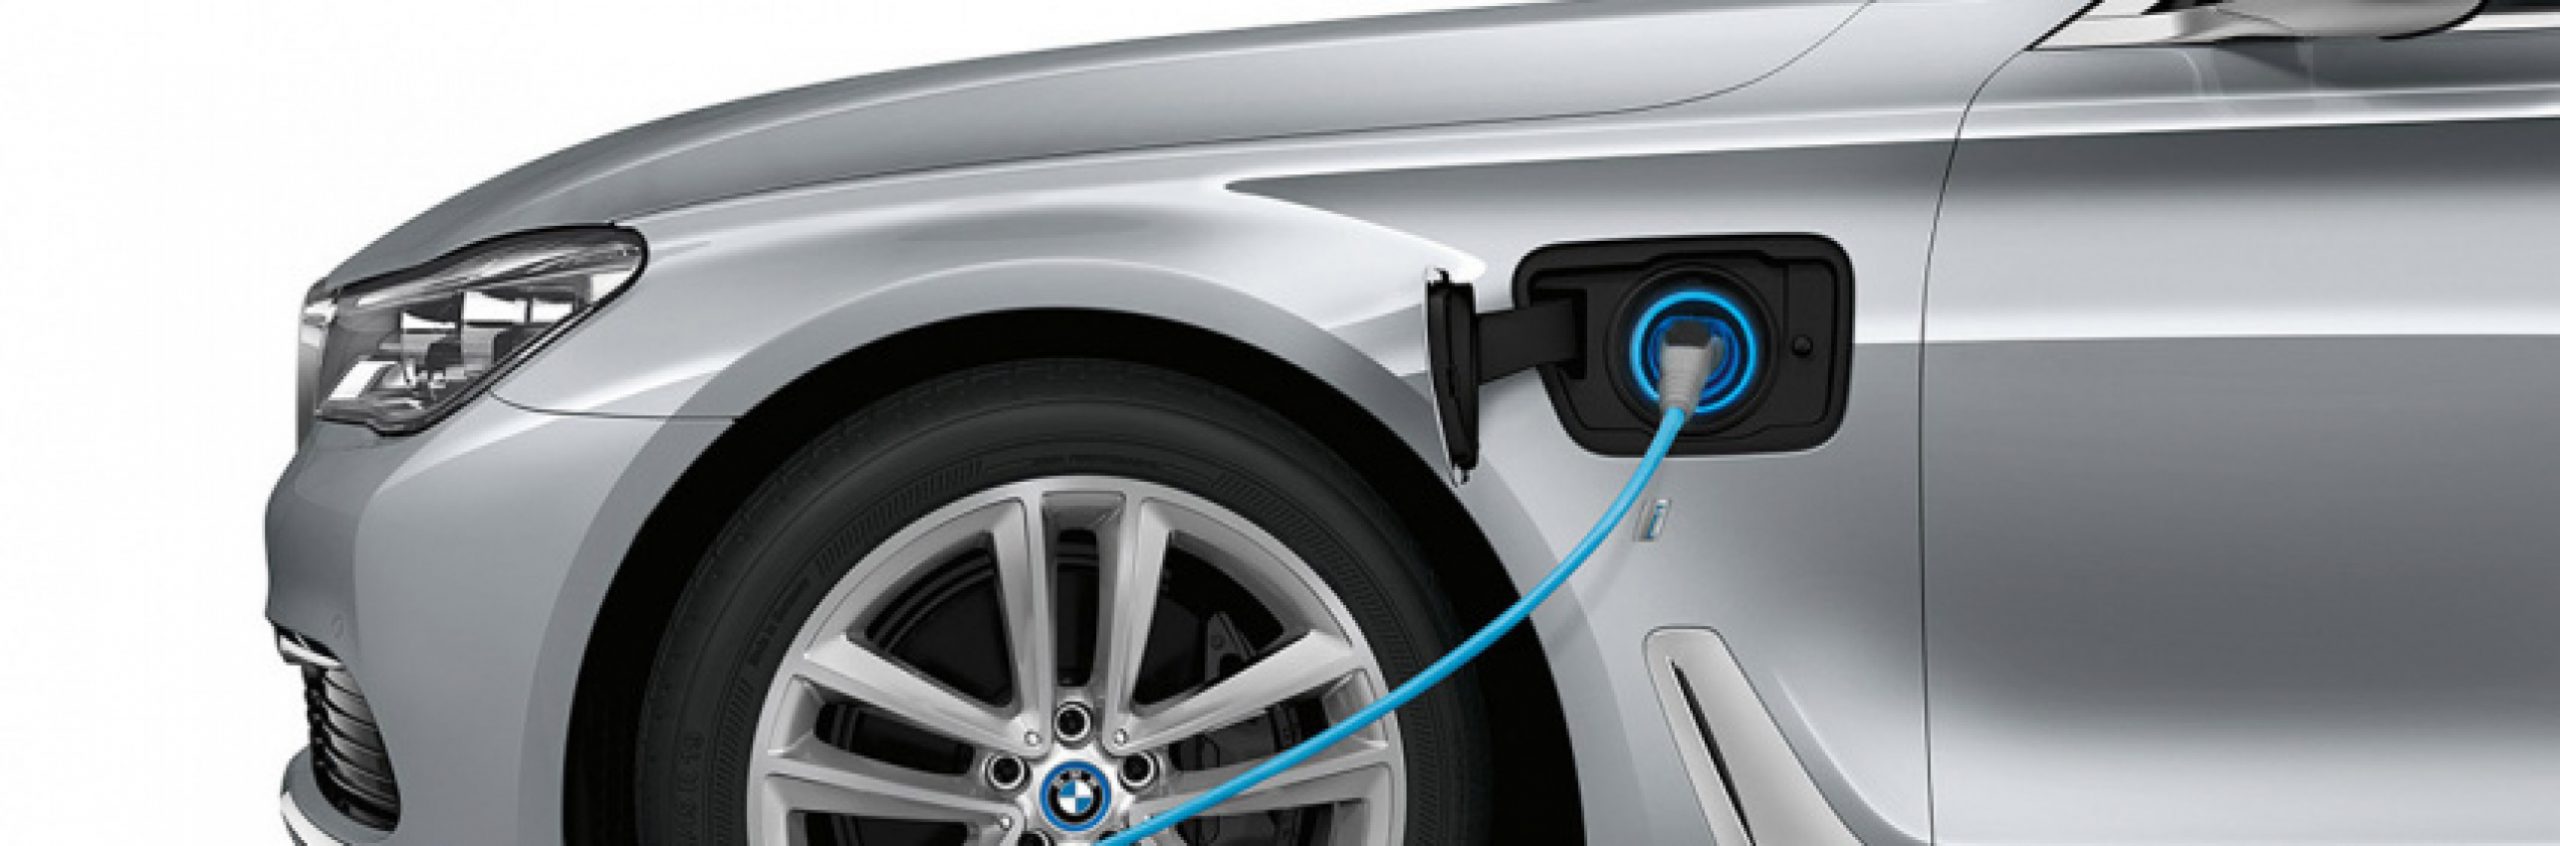 all articles, autos, bmw, cars, 5 reasons why bmw’s 740le delivers electrified driving luxury